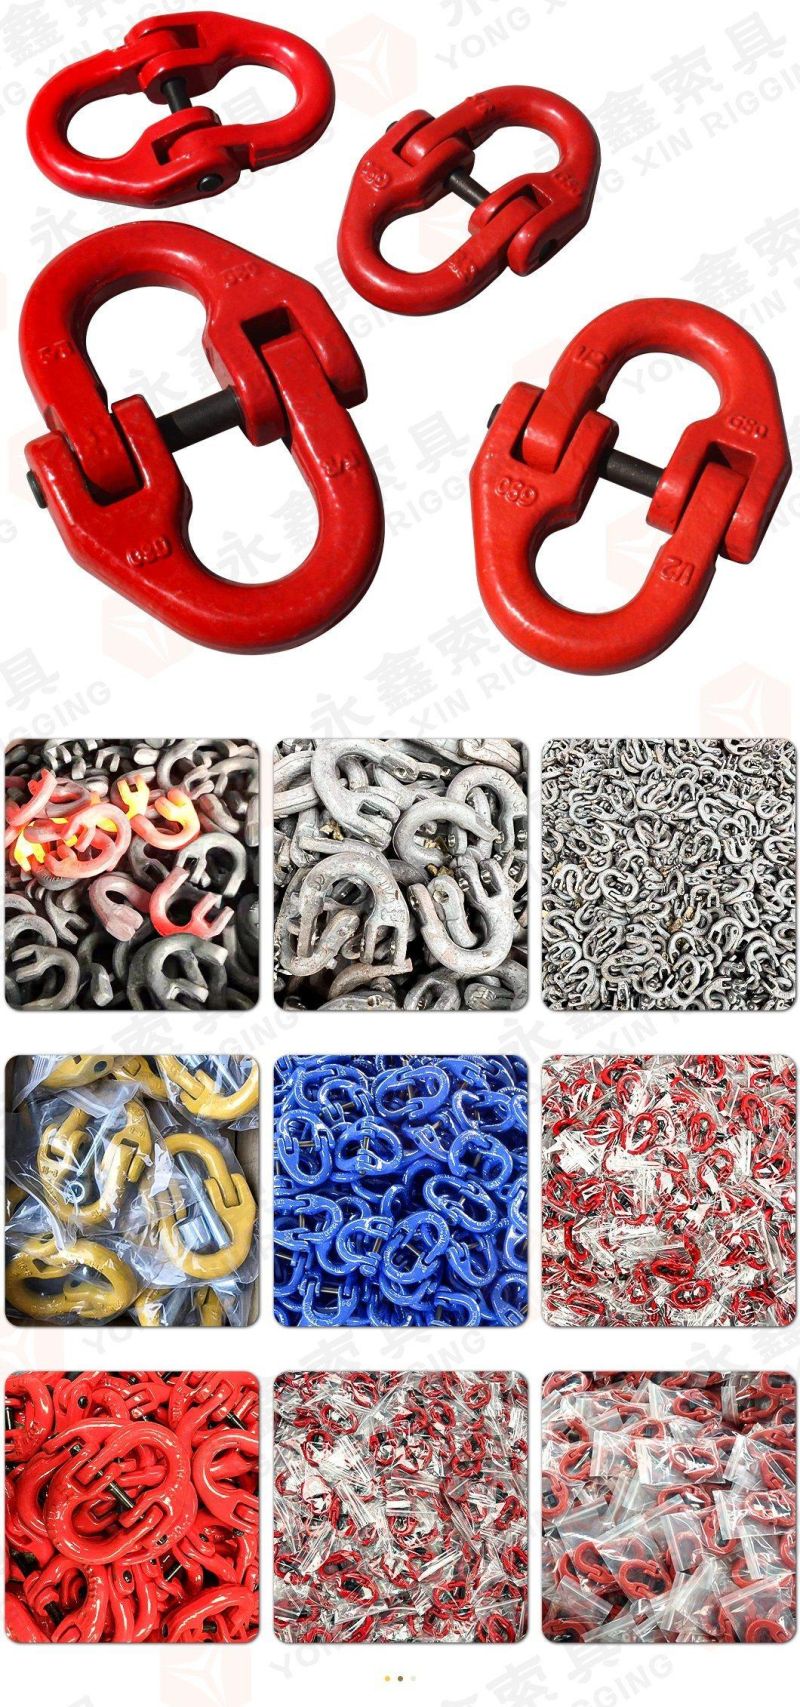 Uaranteed Quality Mining Chain Connectors Alloy High Strength Alloy Steel Connecting Linksalloy Steel